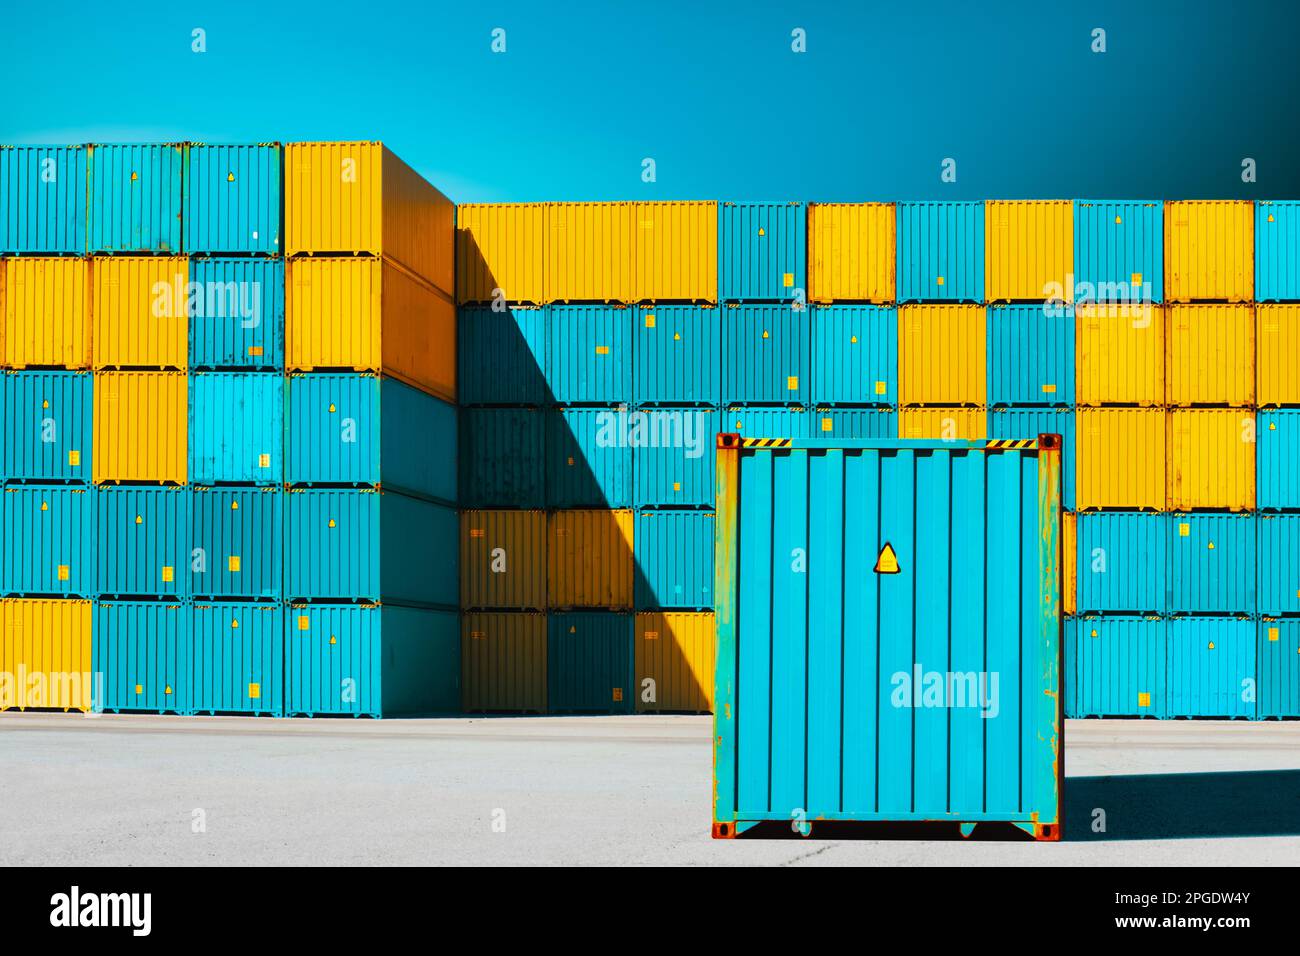 Lone shipping container in front of a stack of blue and yellow shipping containers Stock Photo